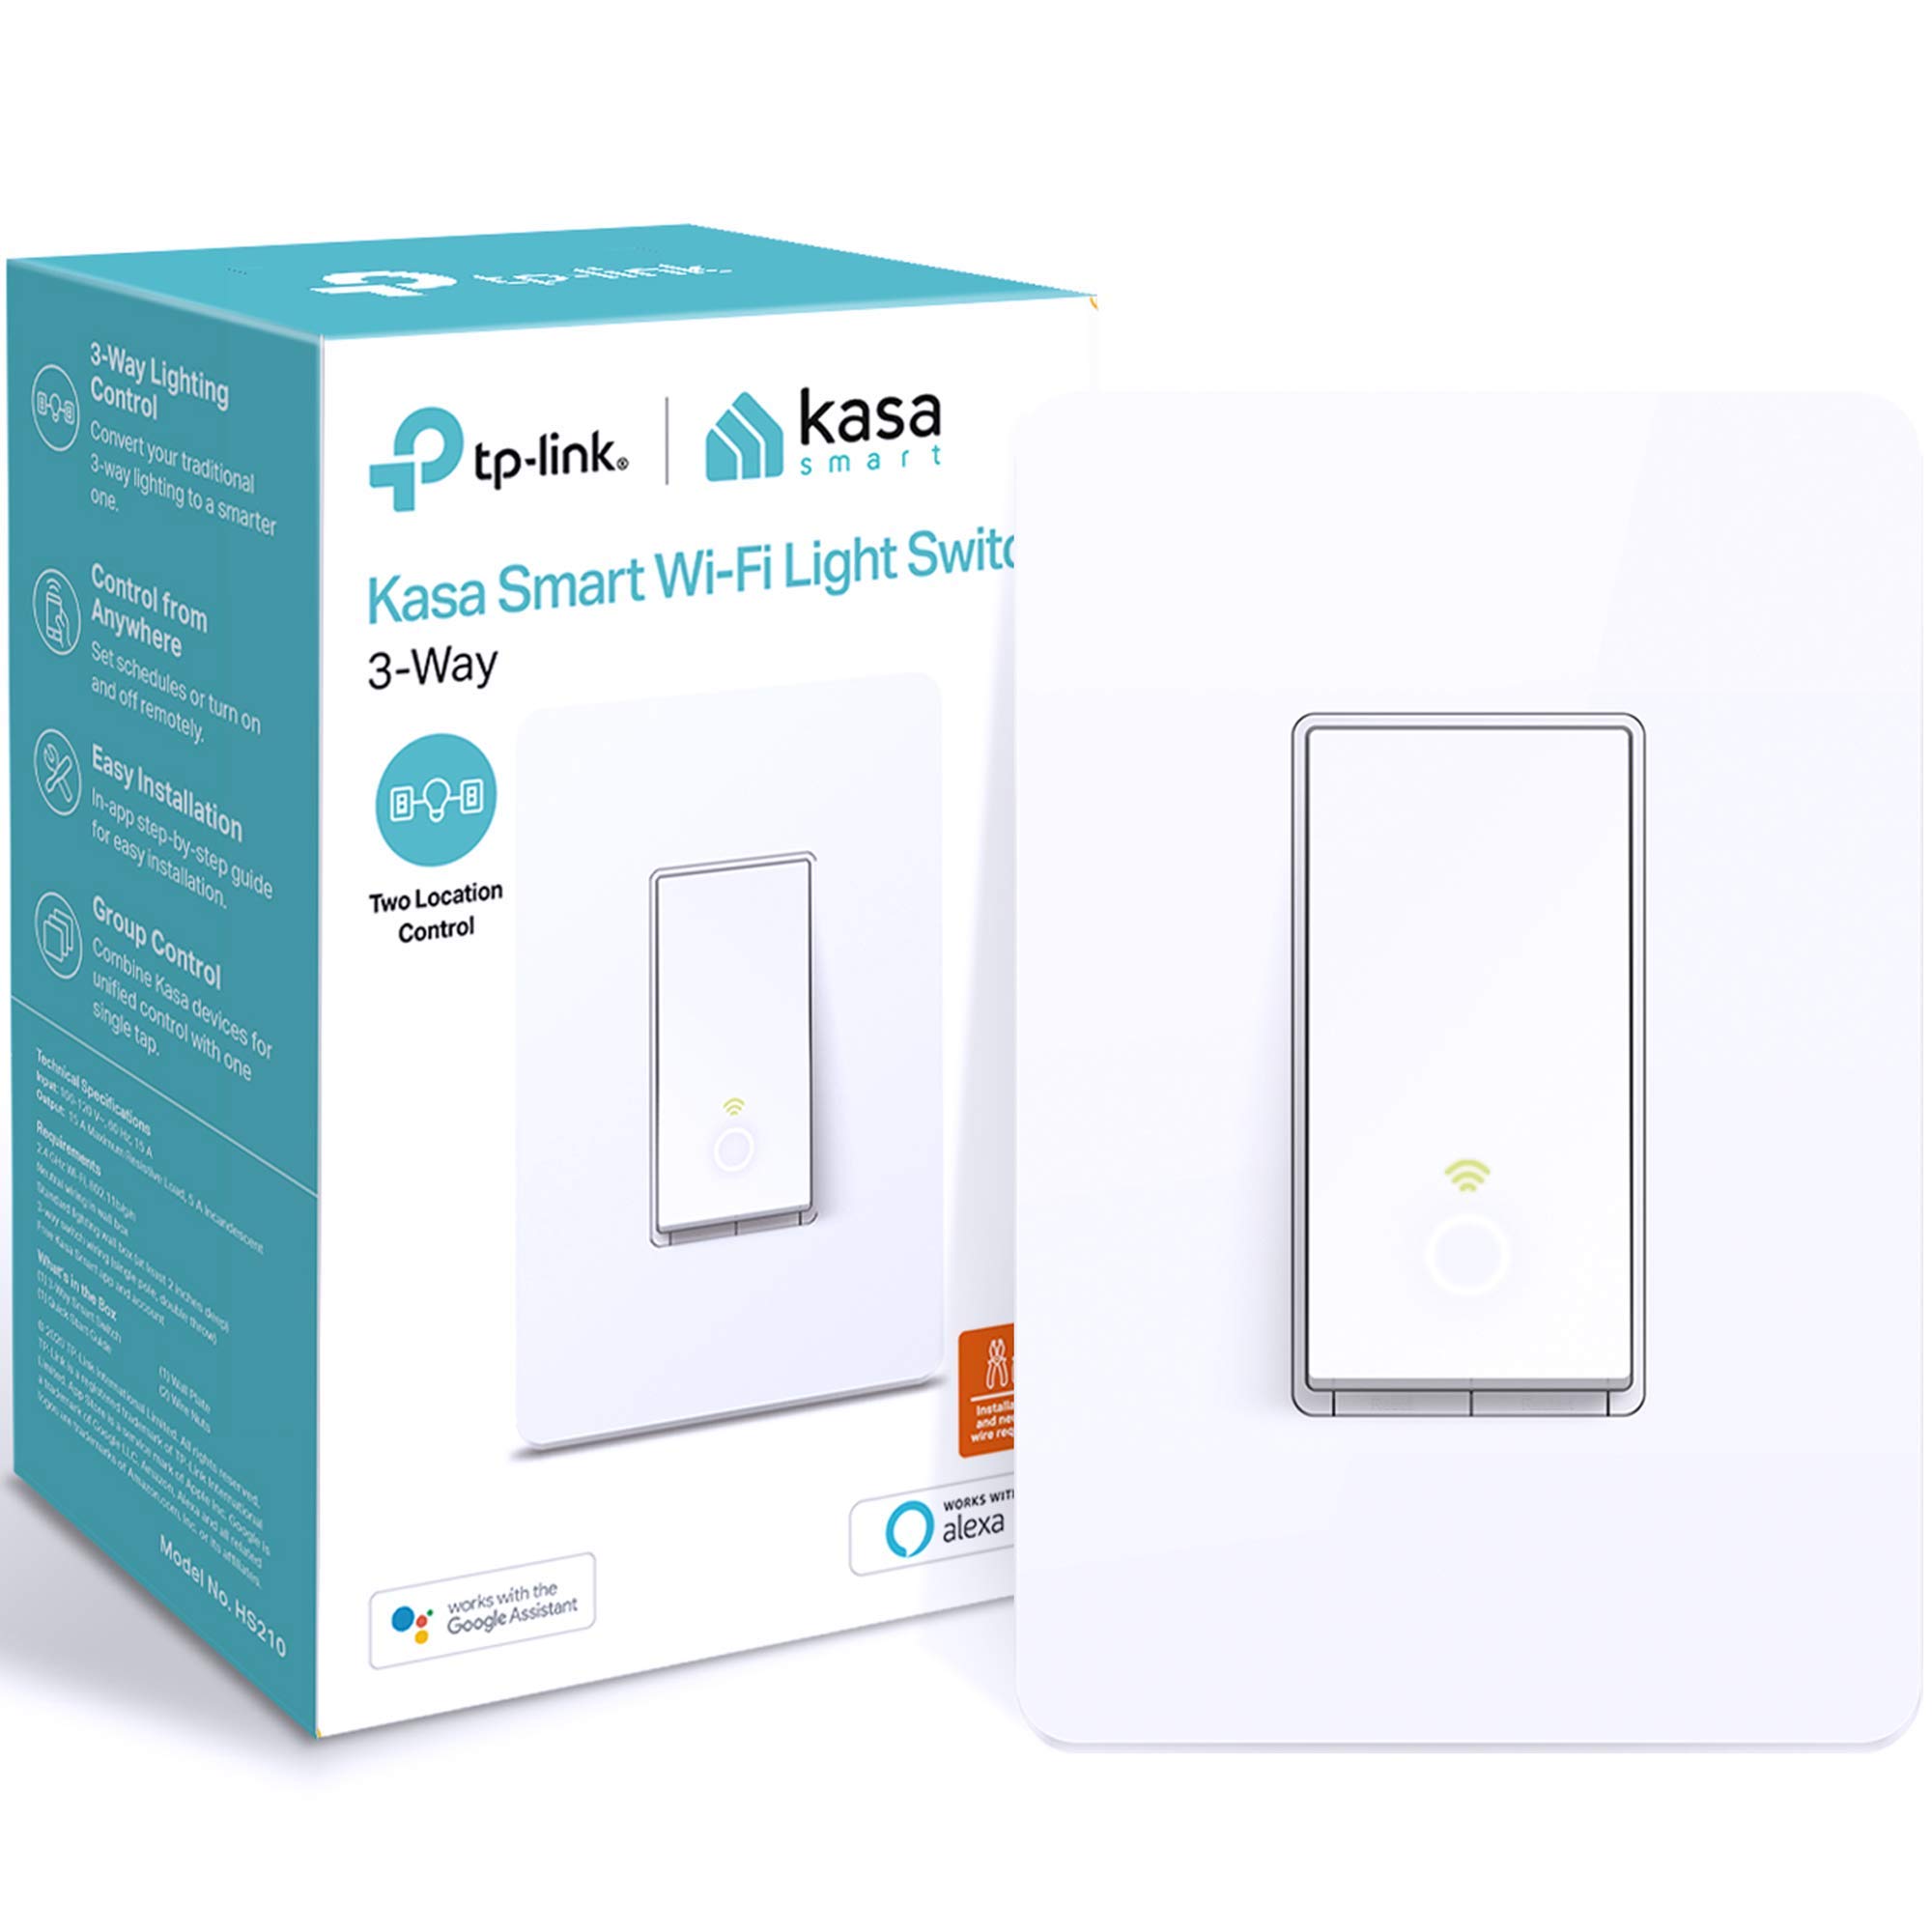 Used Kasa Smart 3 Way Switch HS210, Needs Neutral Wire, 2.4GHz Wi-Fi Light Switch works with Alexa and Google Home, UL Certified, $12.46